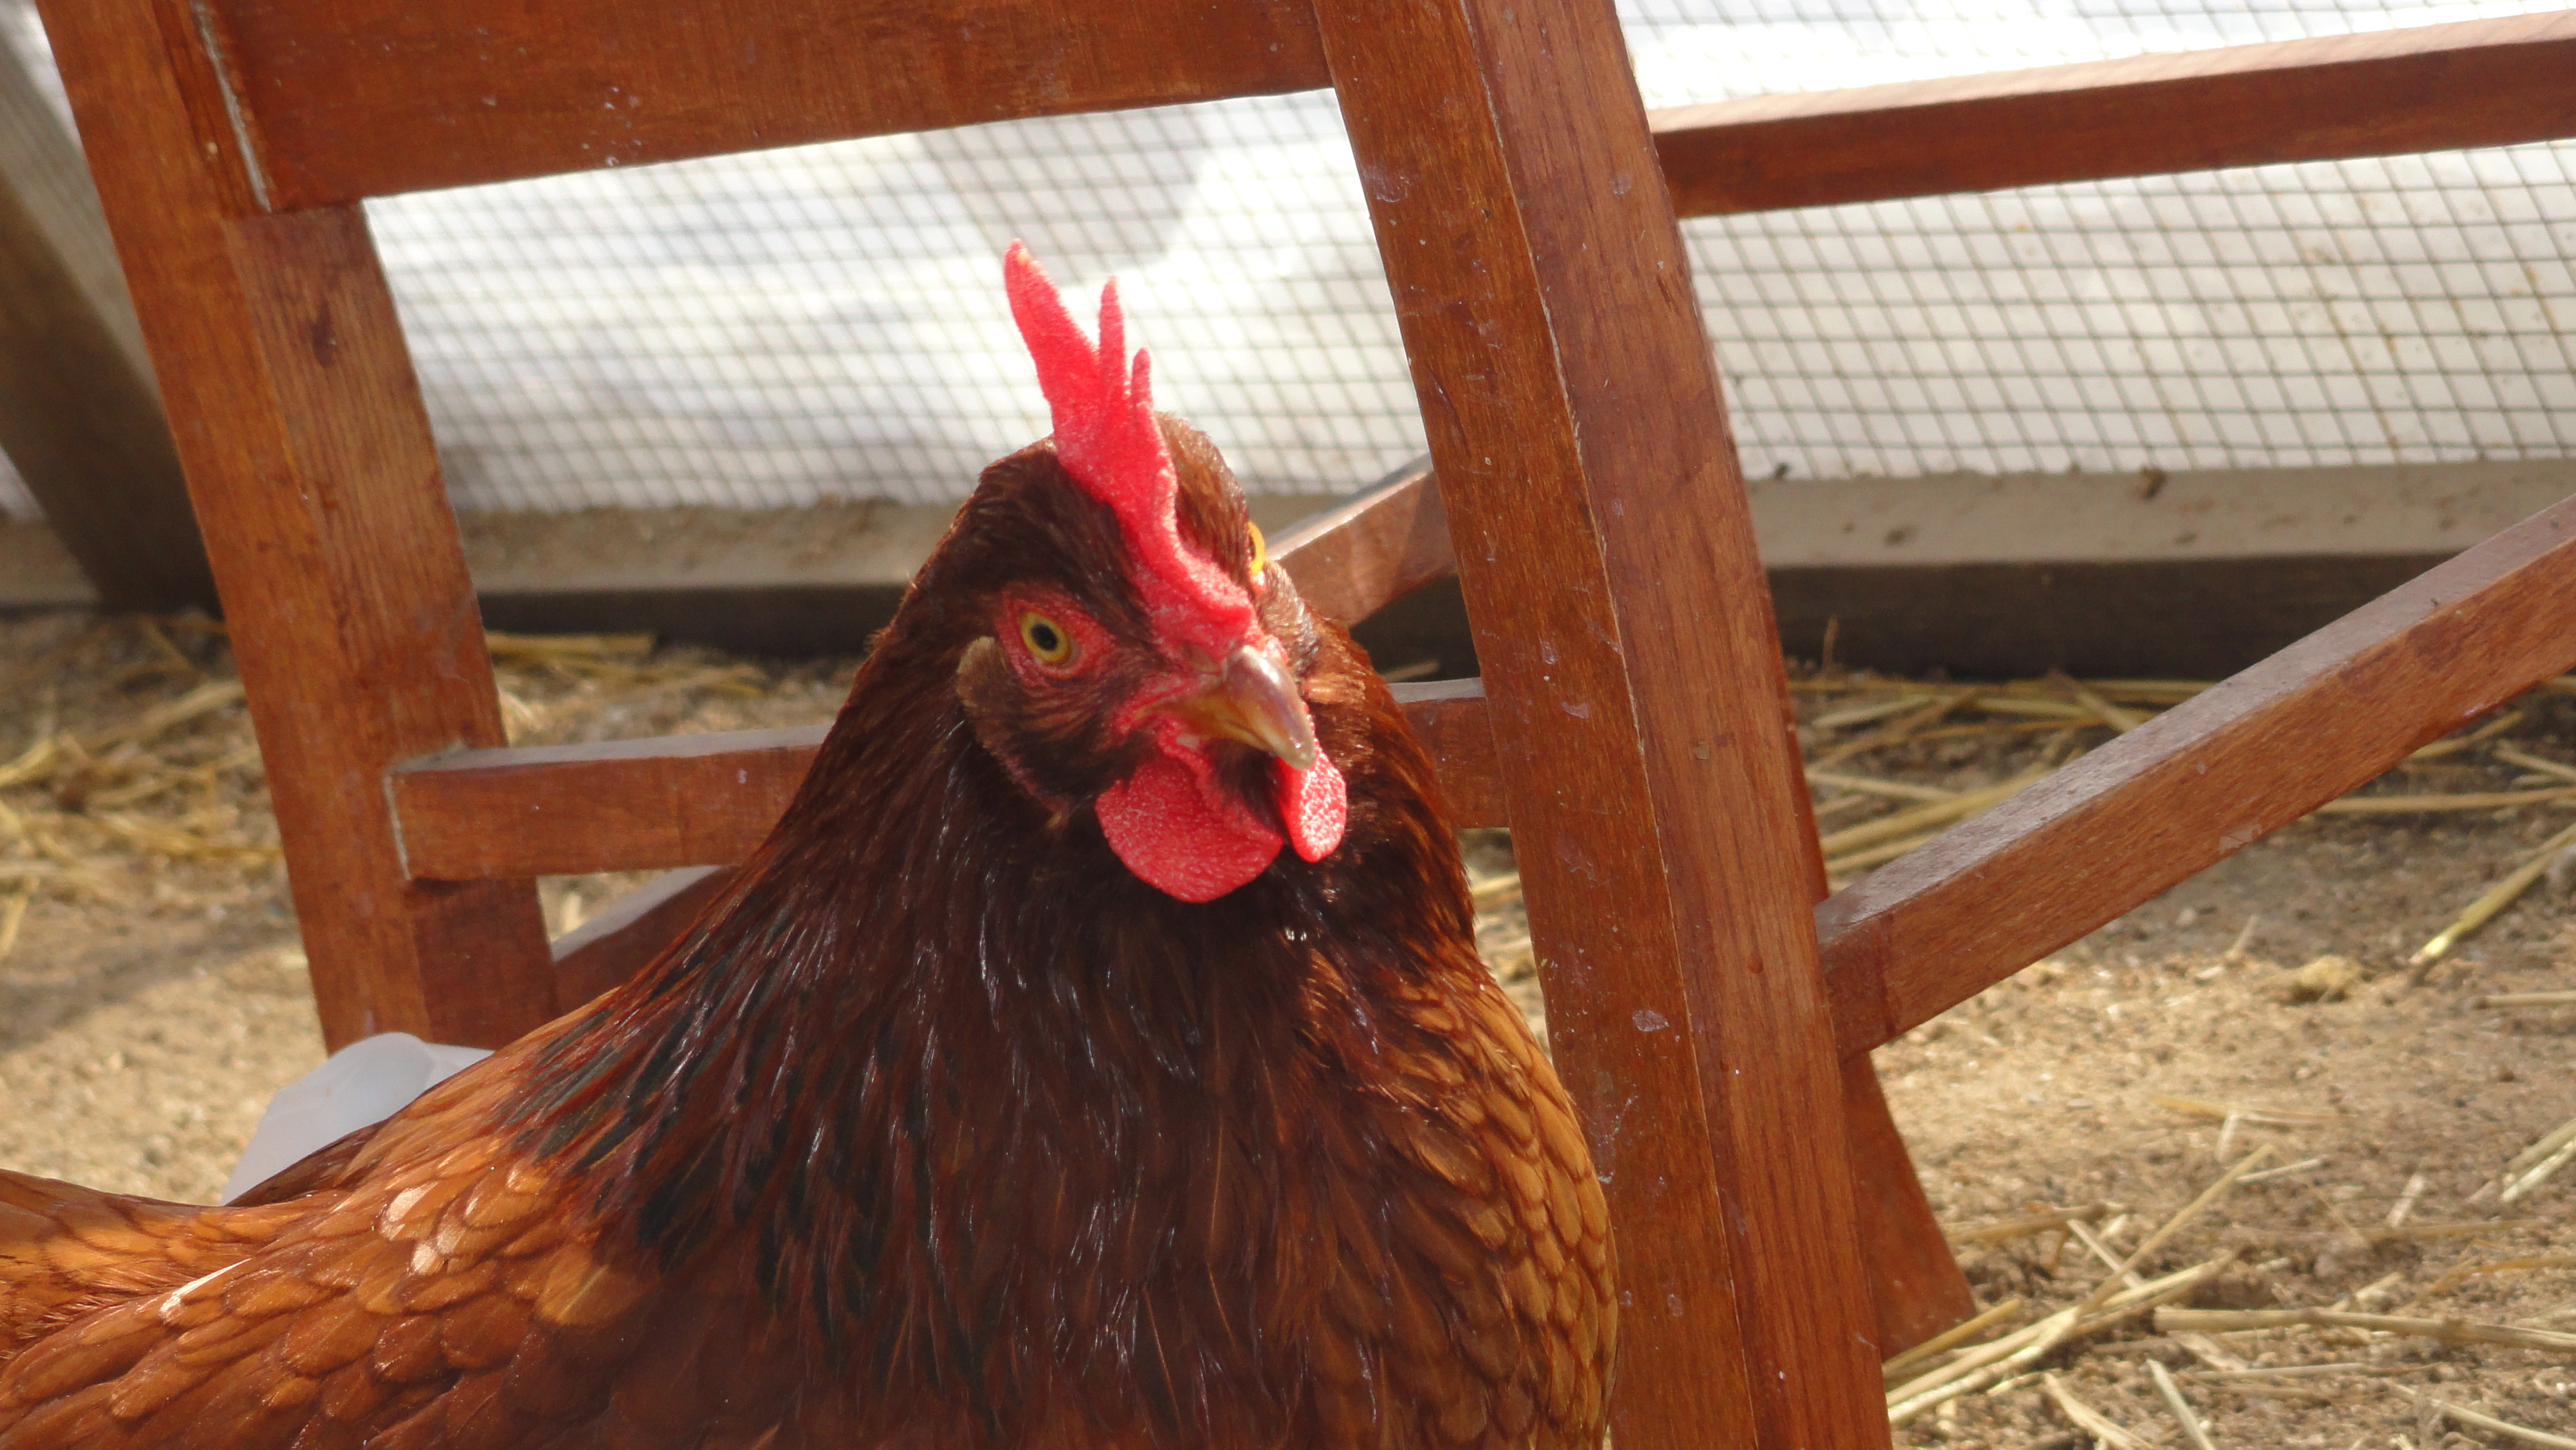 Our other Rhode Island Red, Zinia